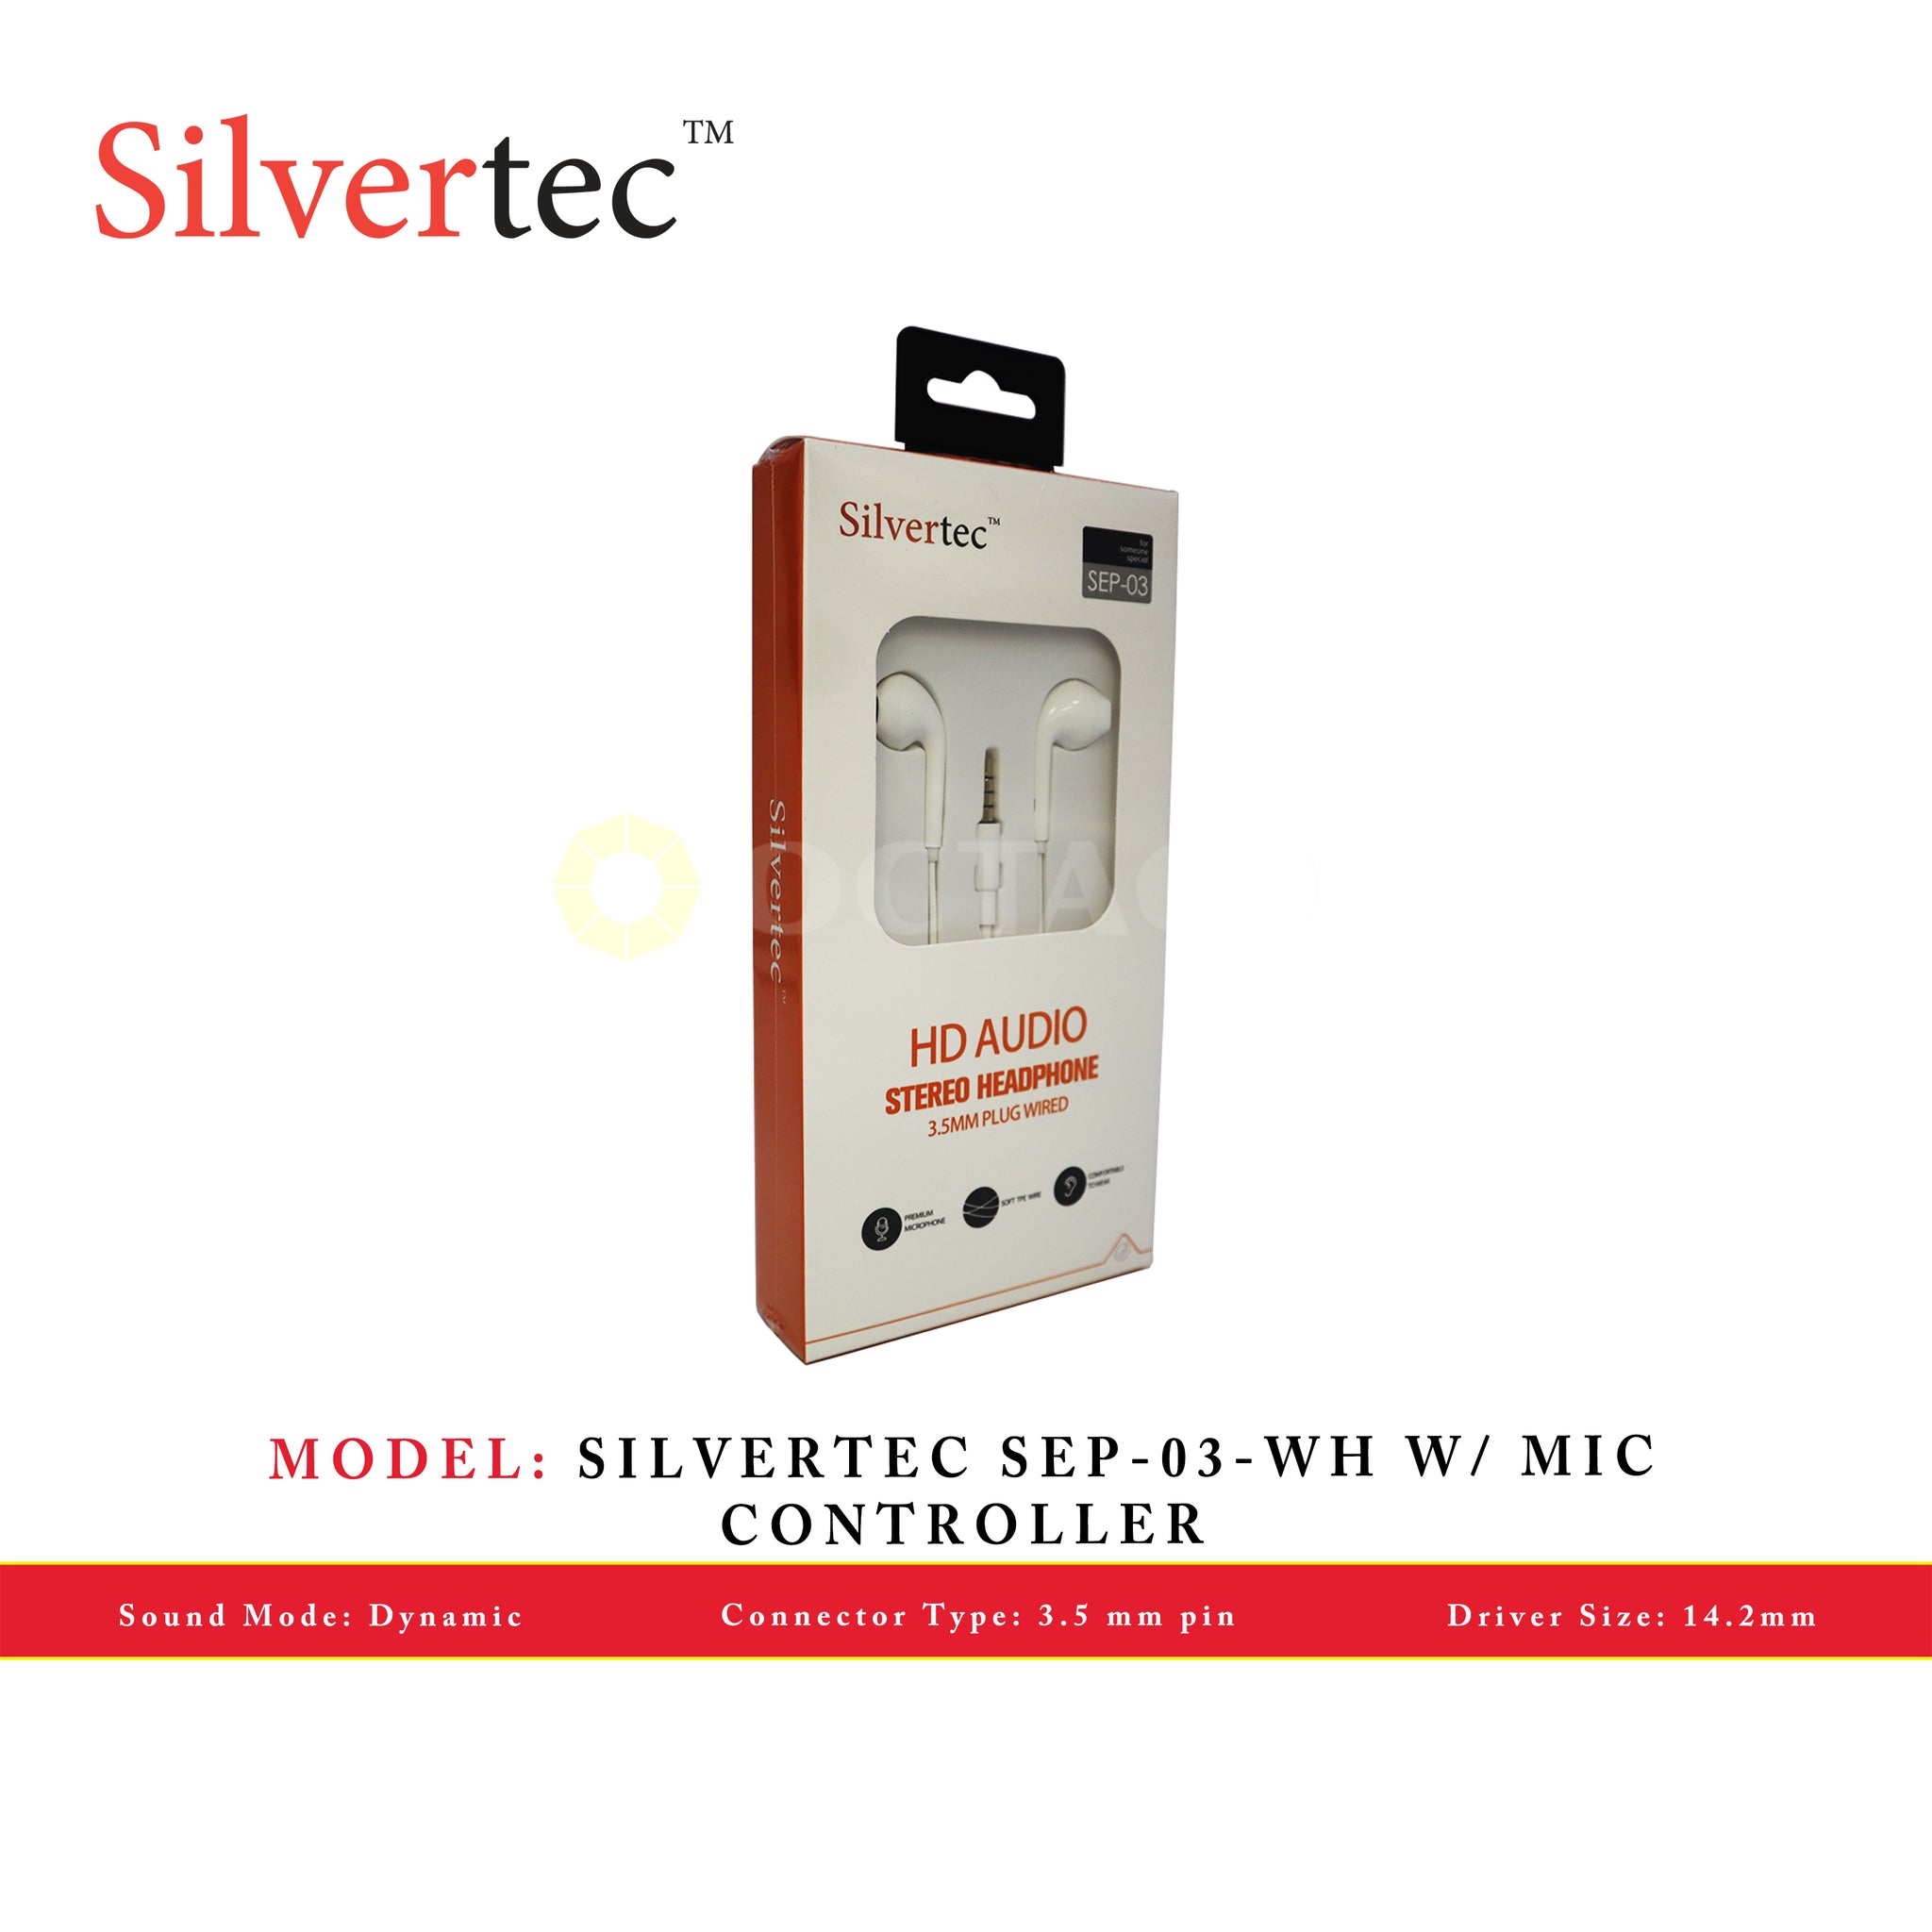 SILVERTEC SEP-03-WH W/ MIC CONTROLLER